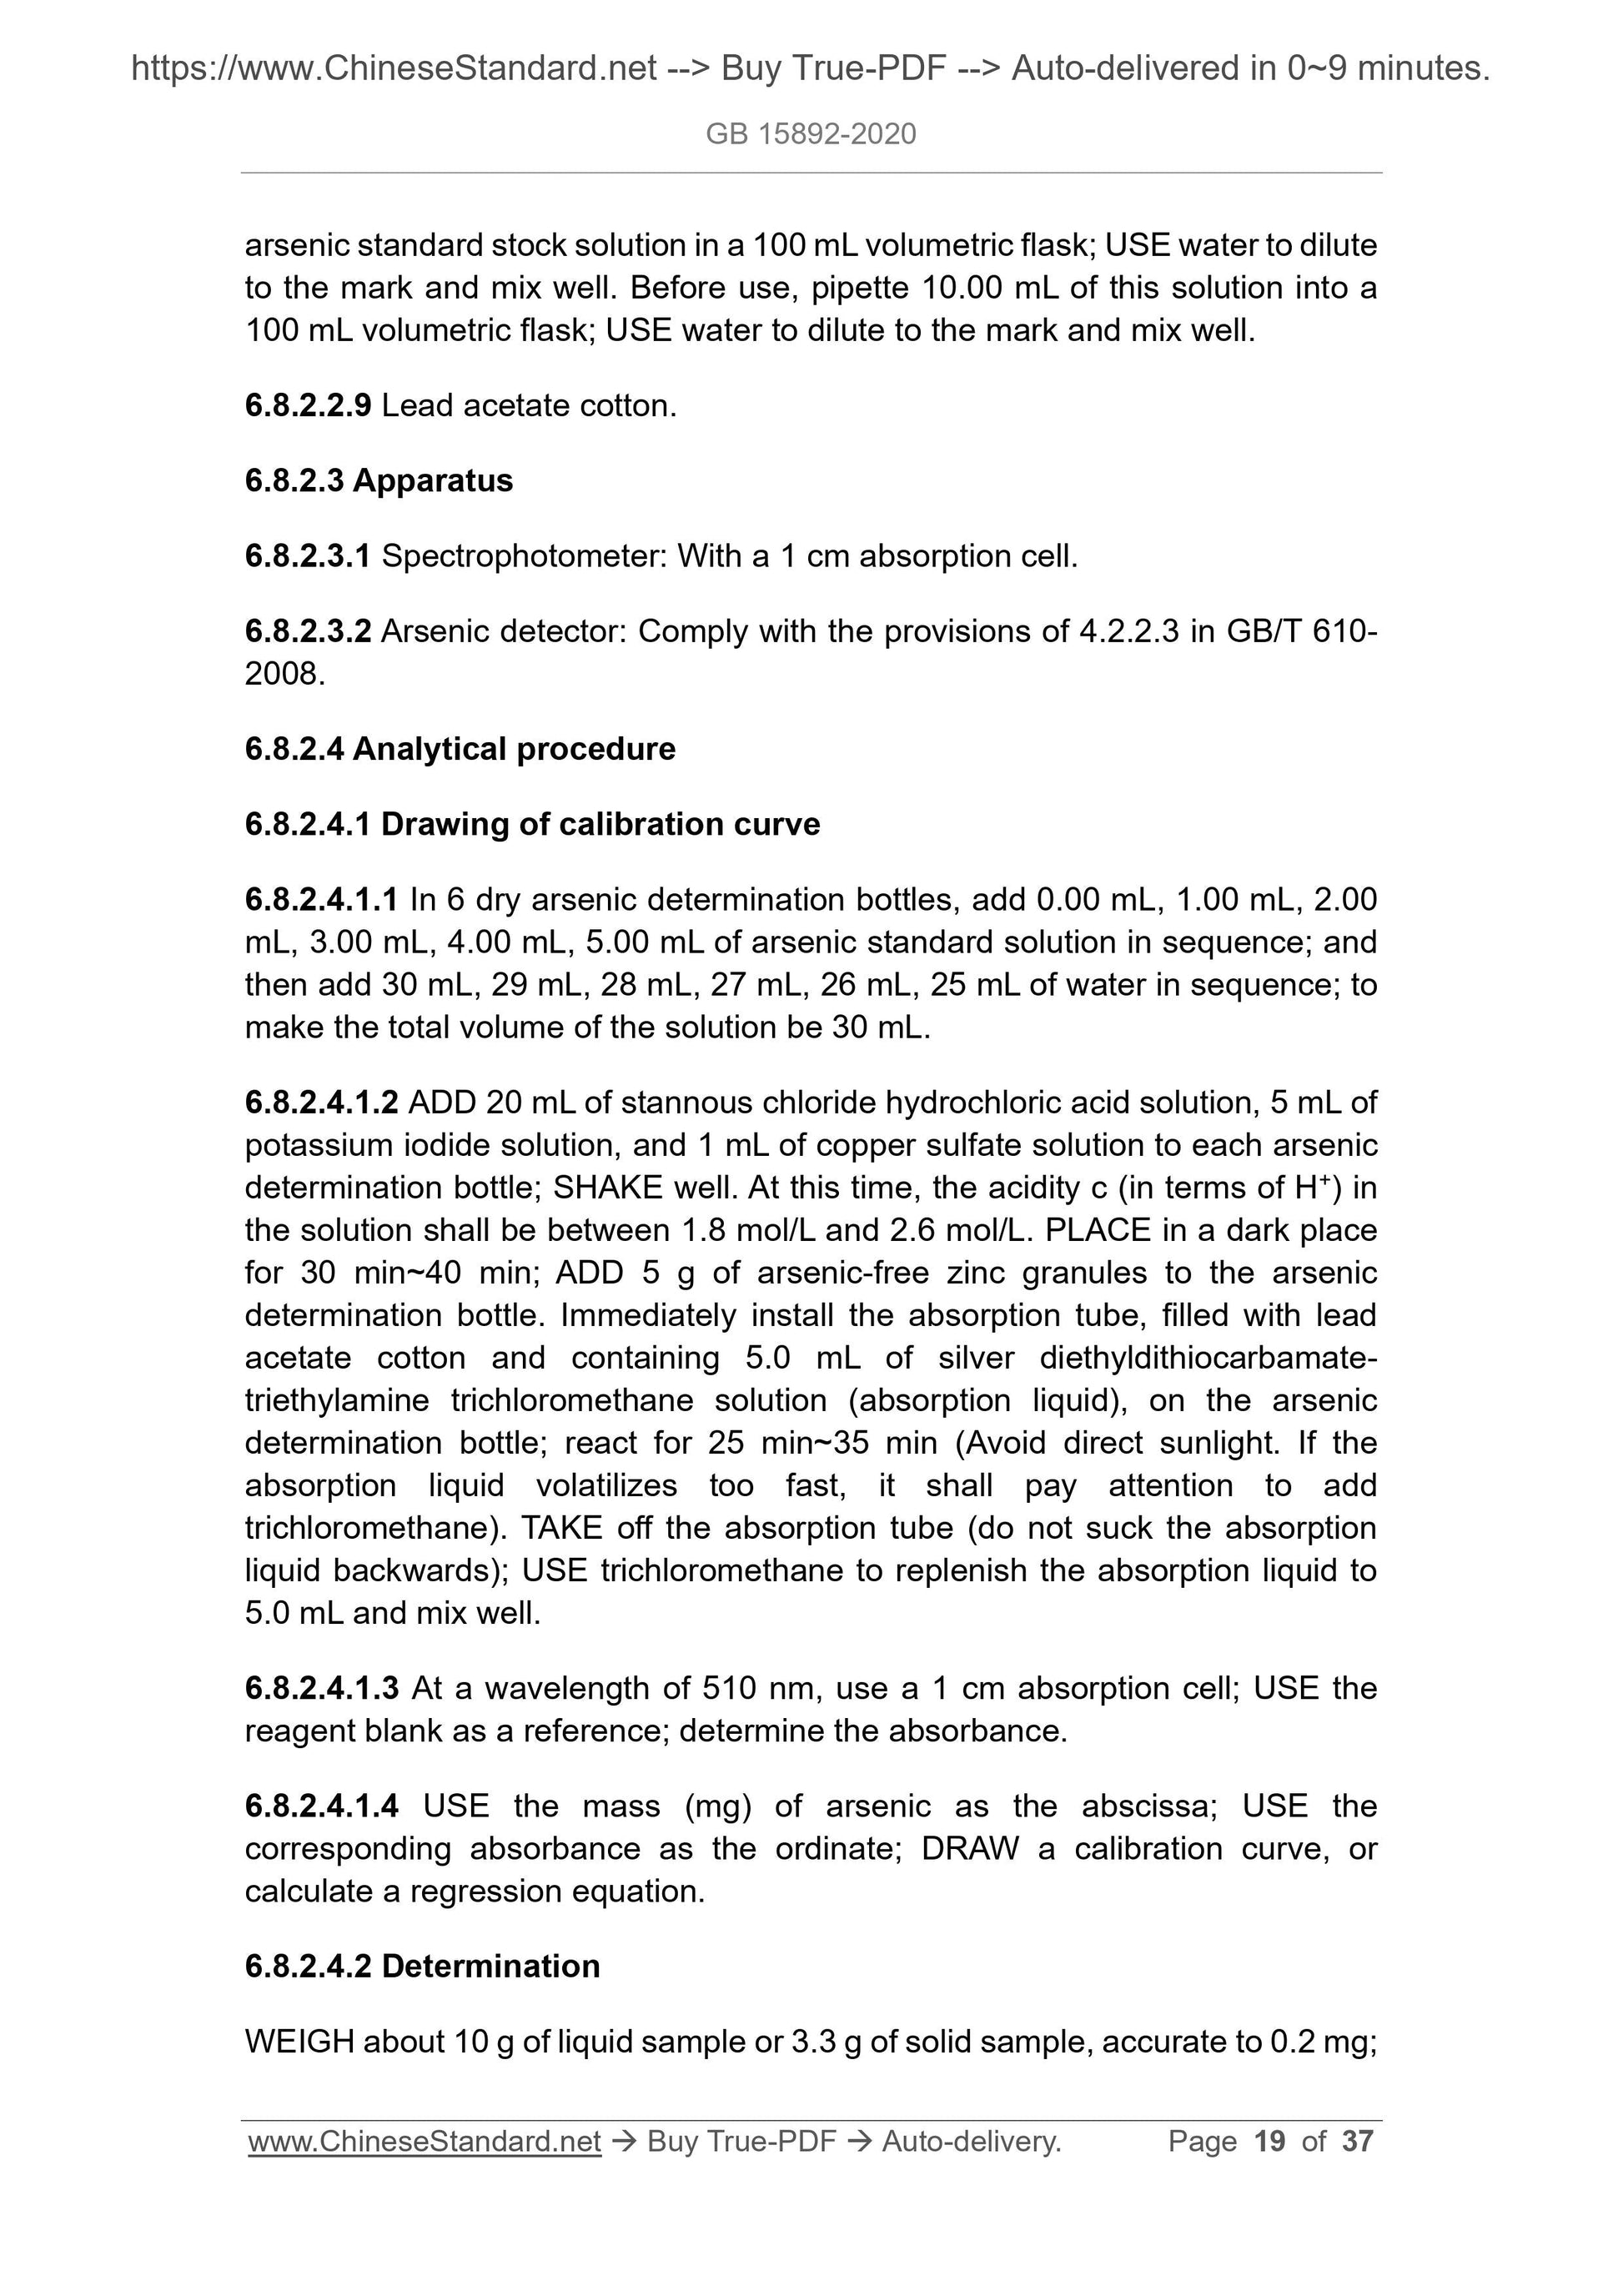 GB 15892-2020 Page 7